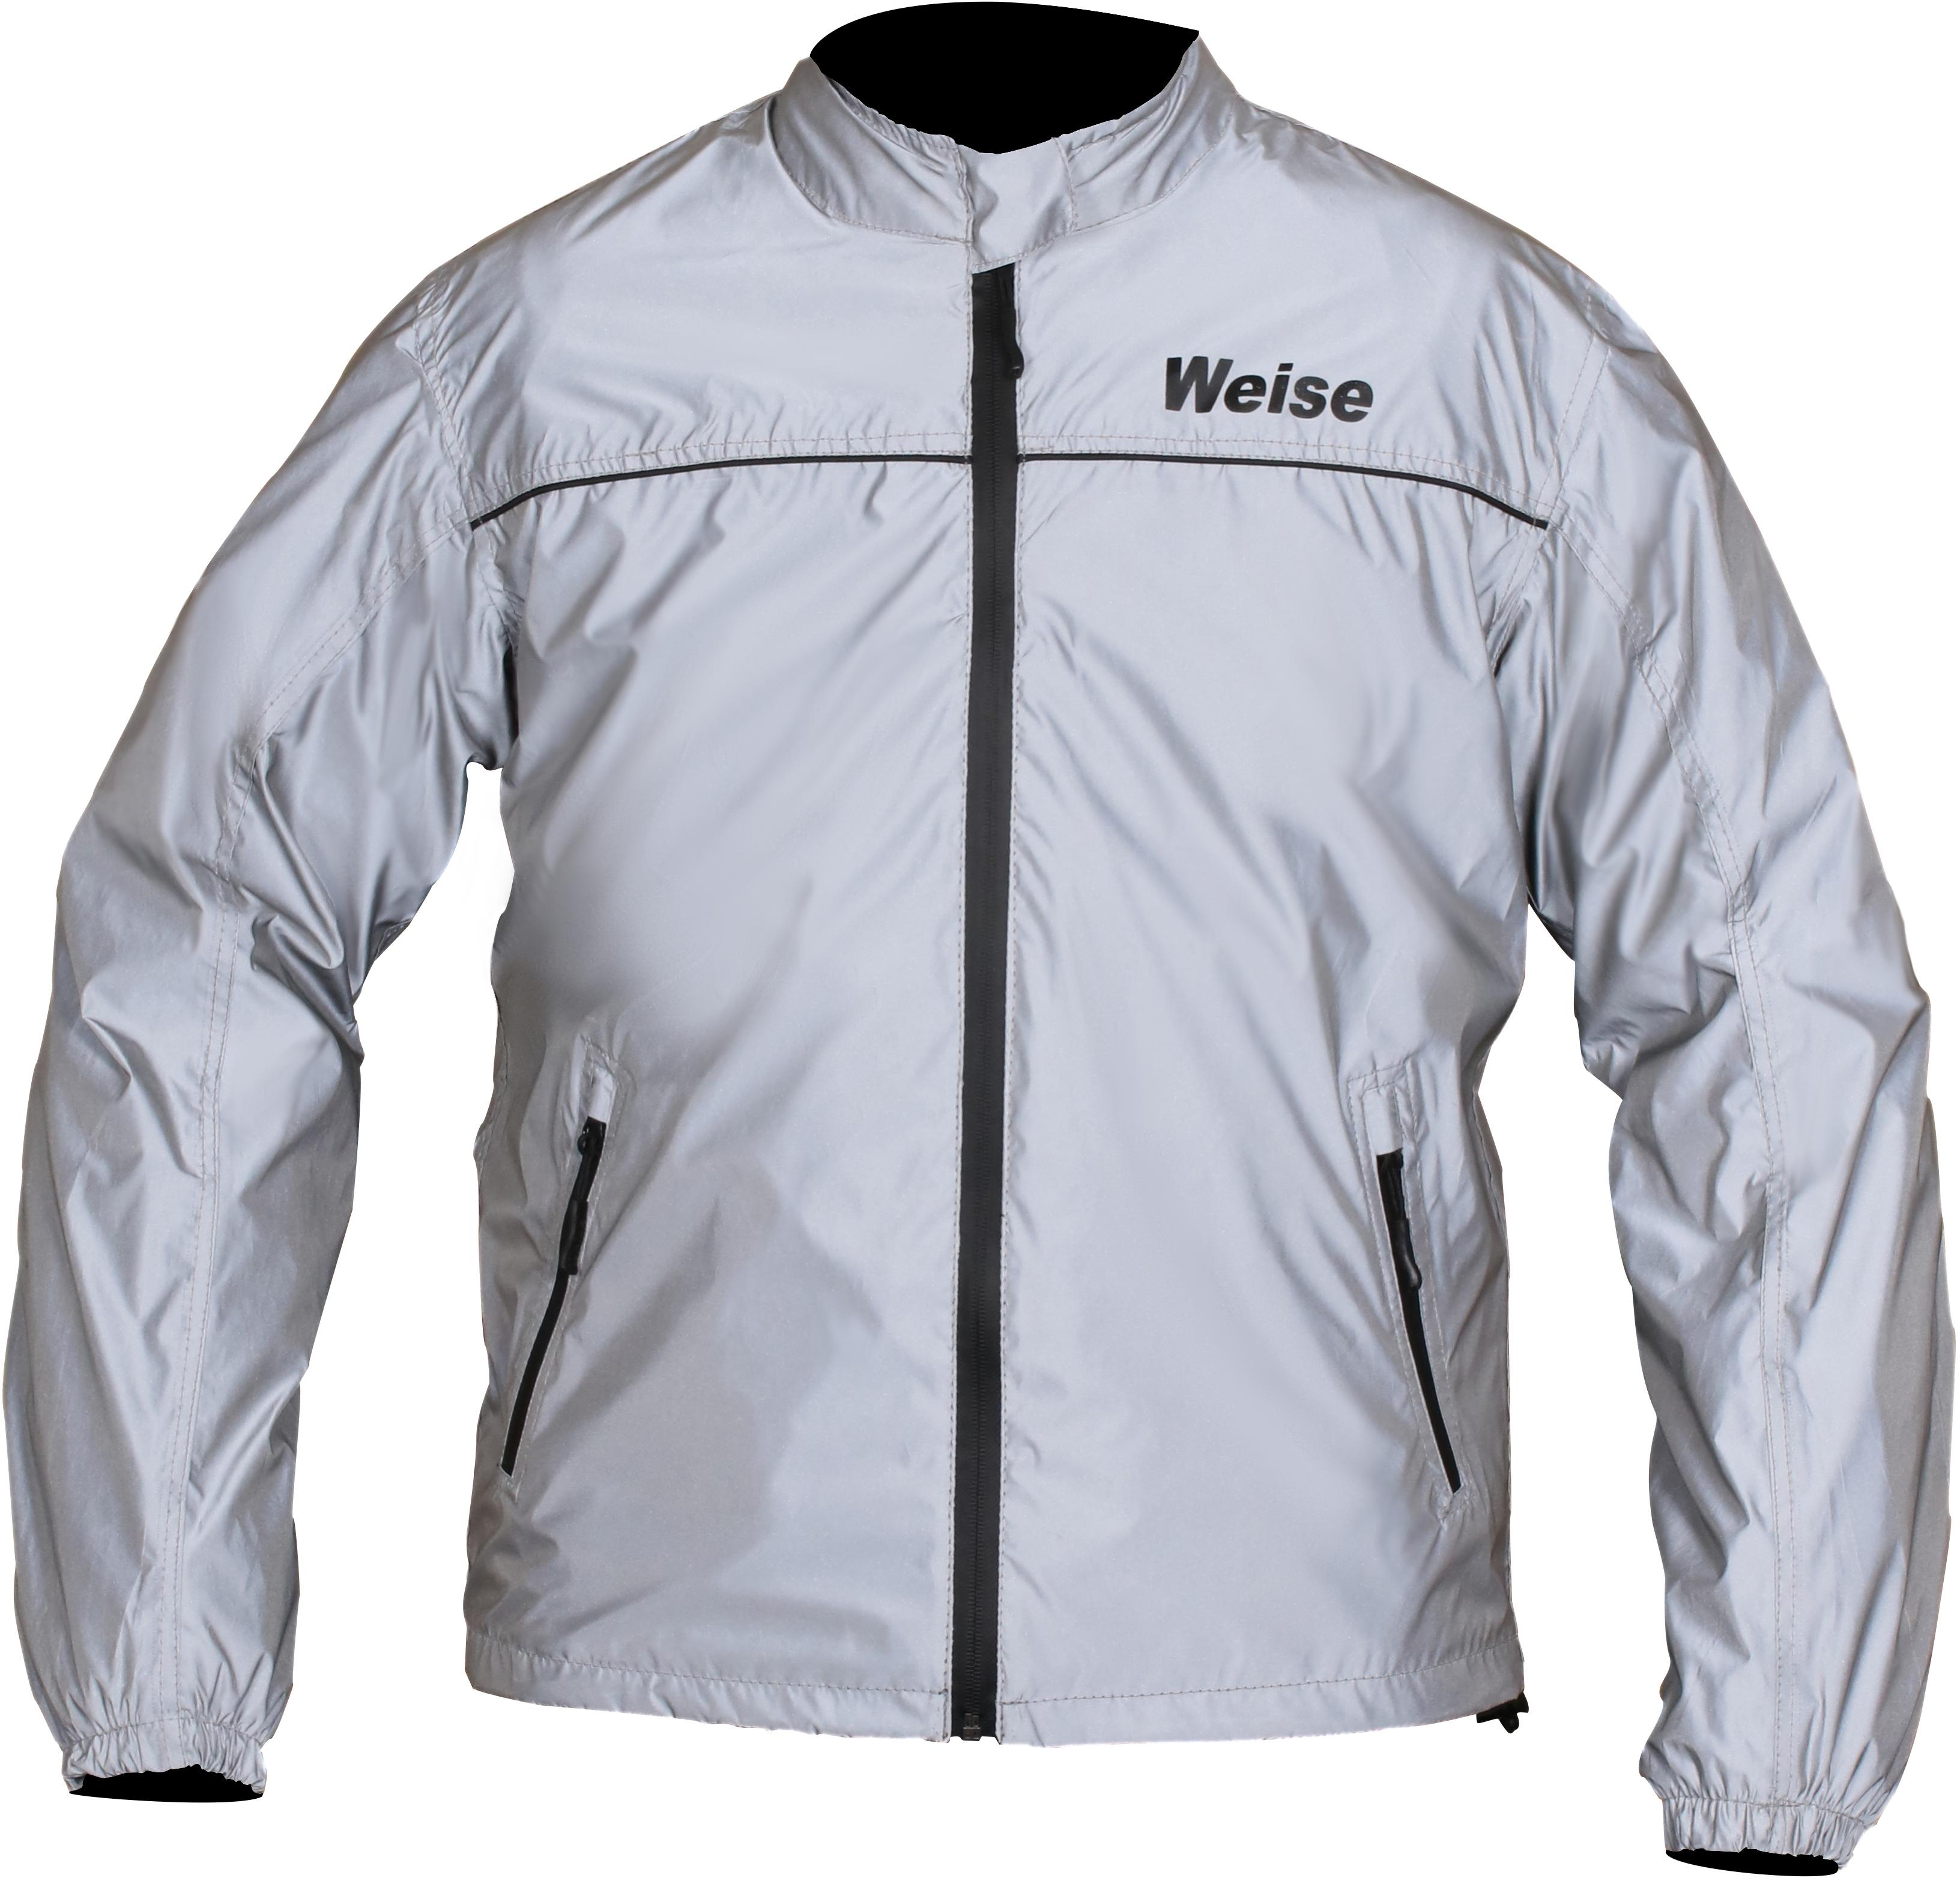 Weise Vision Jacket Me